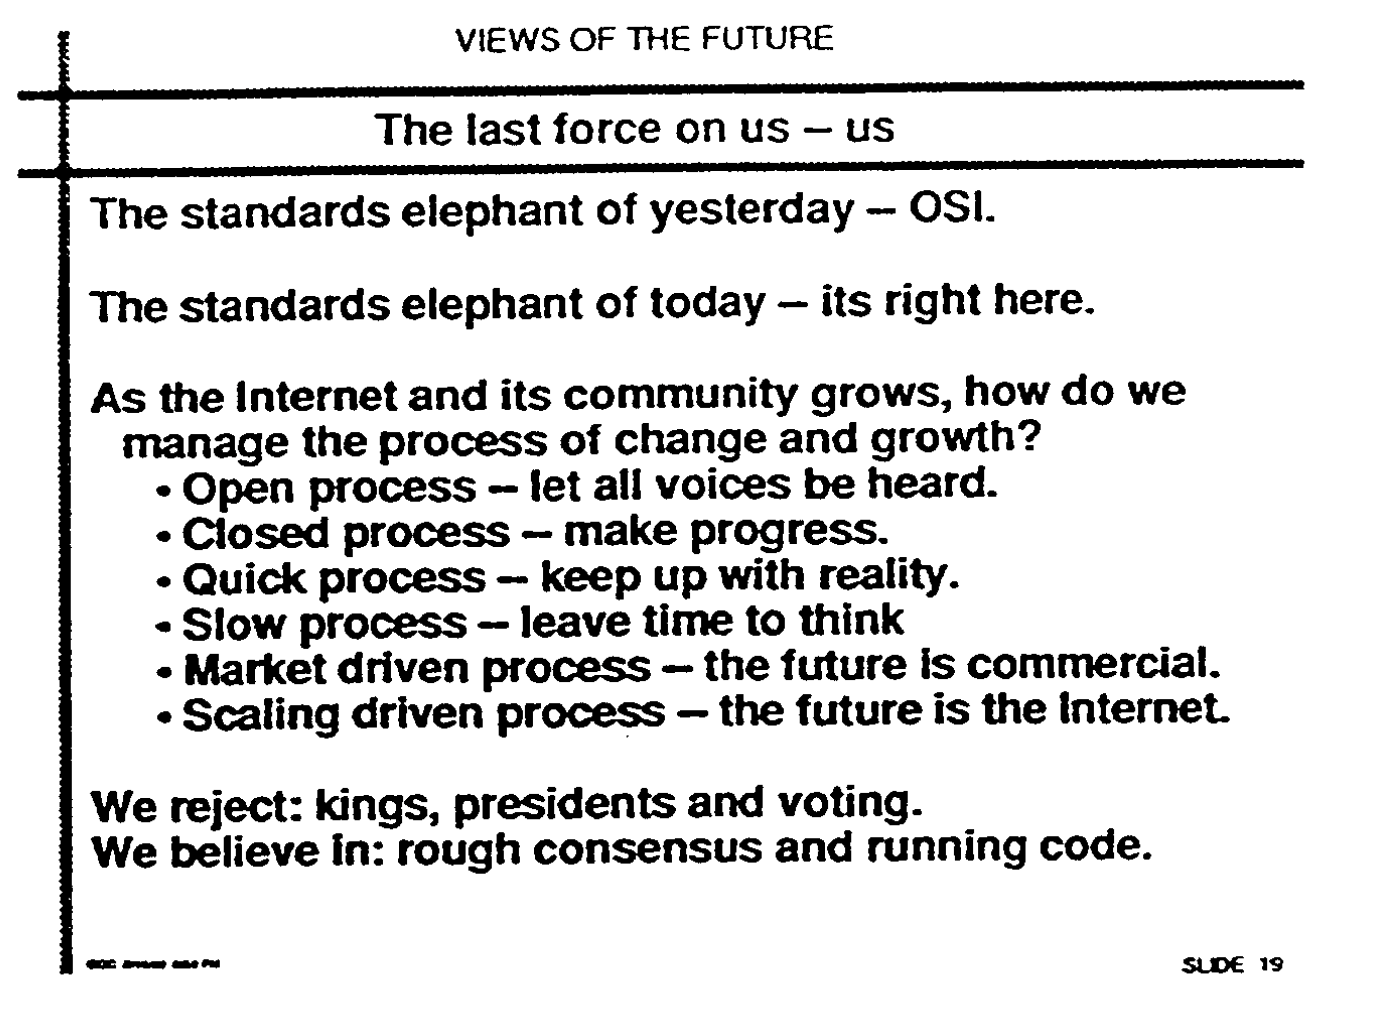 Black and white slide with title "The last force on us - us," page 551 in https://www.ietf.org/proceedings/24.pdf full text: "The standards elephant  of  yesterday  - OSi. The standards elephant of today - its right here. As the Internet and its community grows, how do wemanage the process of change and  growth? ̄Open process - let all voices  be heard. ̄Closed  process - make progress. ̄Quick process - keep up with reality. Slow process - leave  time to think Market driven process - future is commercial. Scaling driven  process - the  future is the internet. We reject: kings, presidents and voting.We believe in: rough consensus and running code."